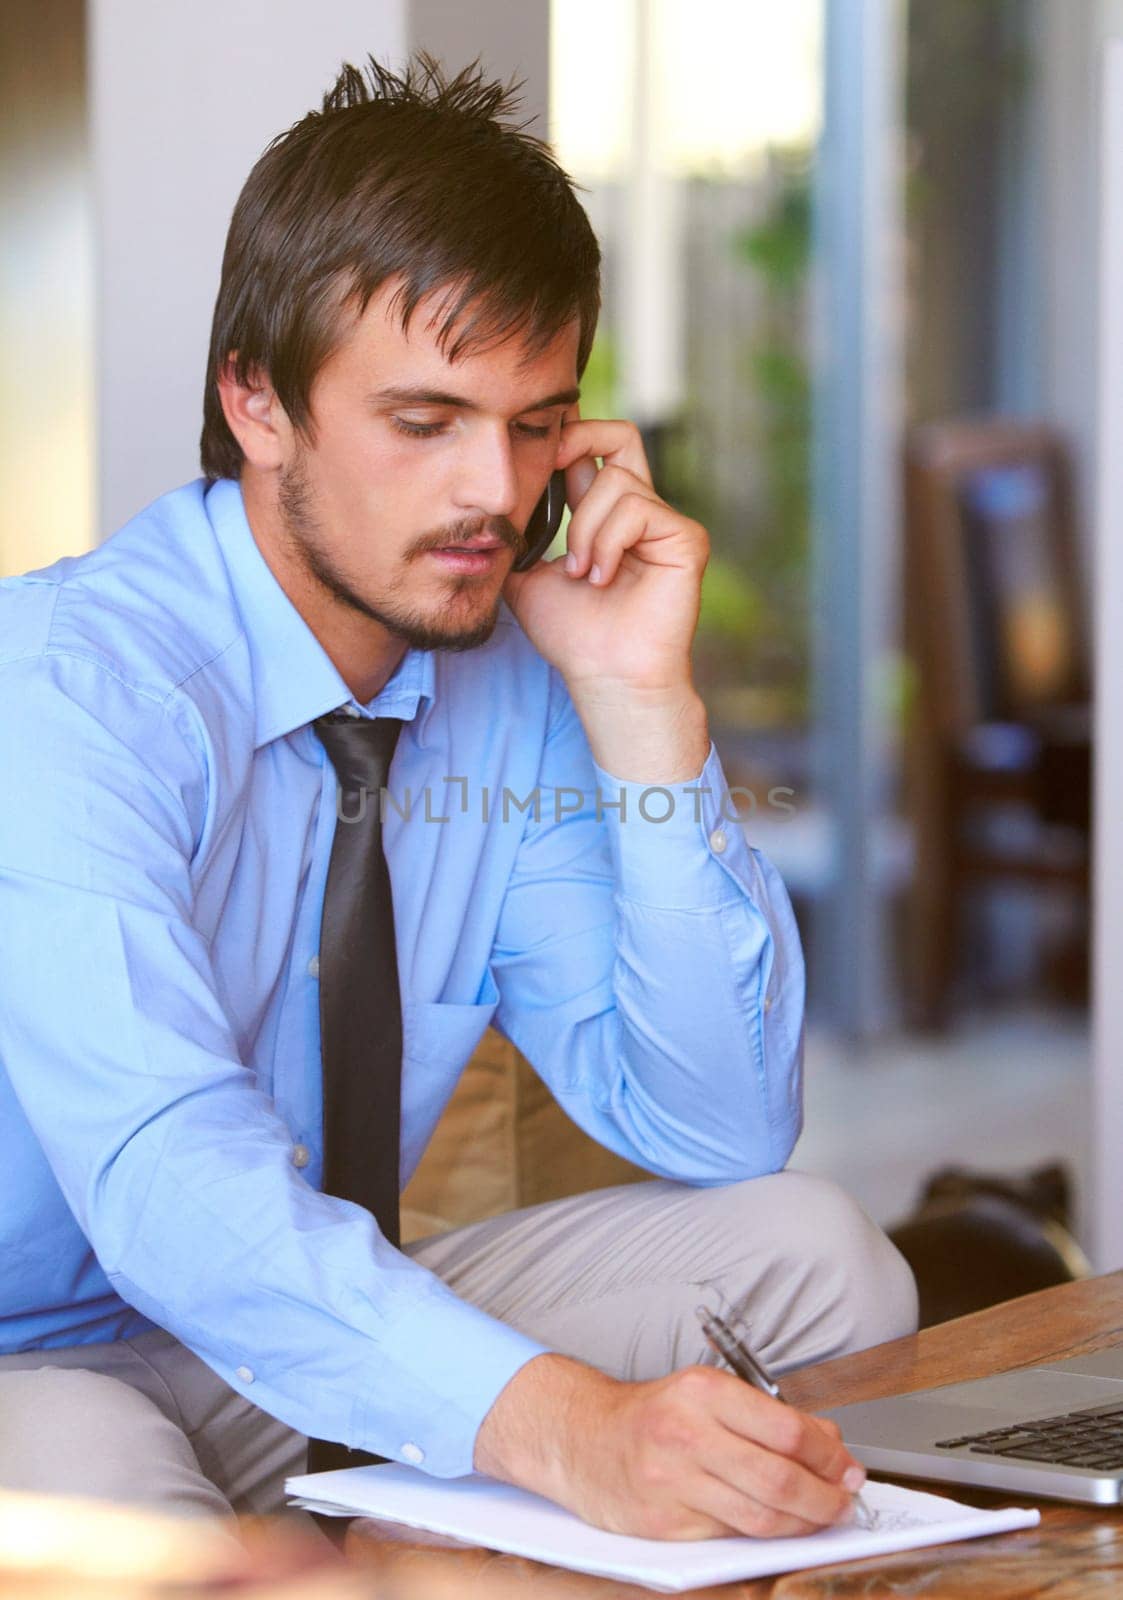 Cellphone, businessman on call and paperwork or document of schedule. Communication or consulting, man multitasking holding pen and smartphone taking notes of corporate information at office.